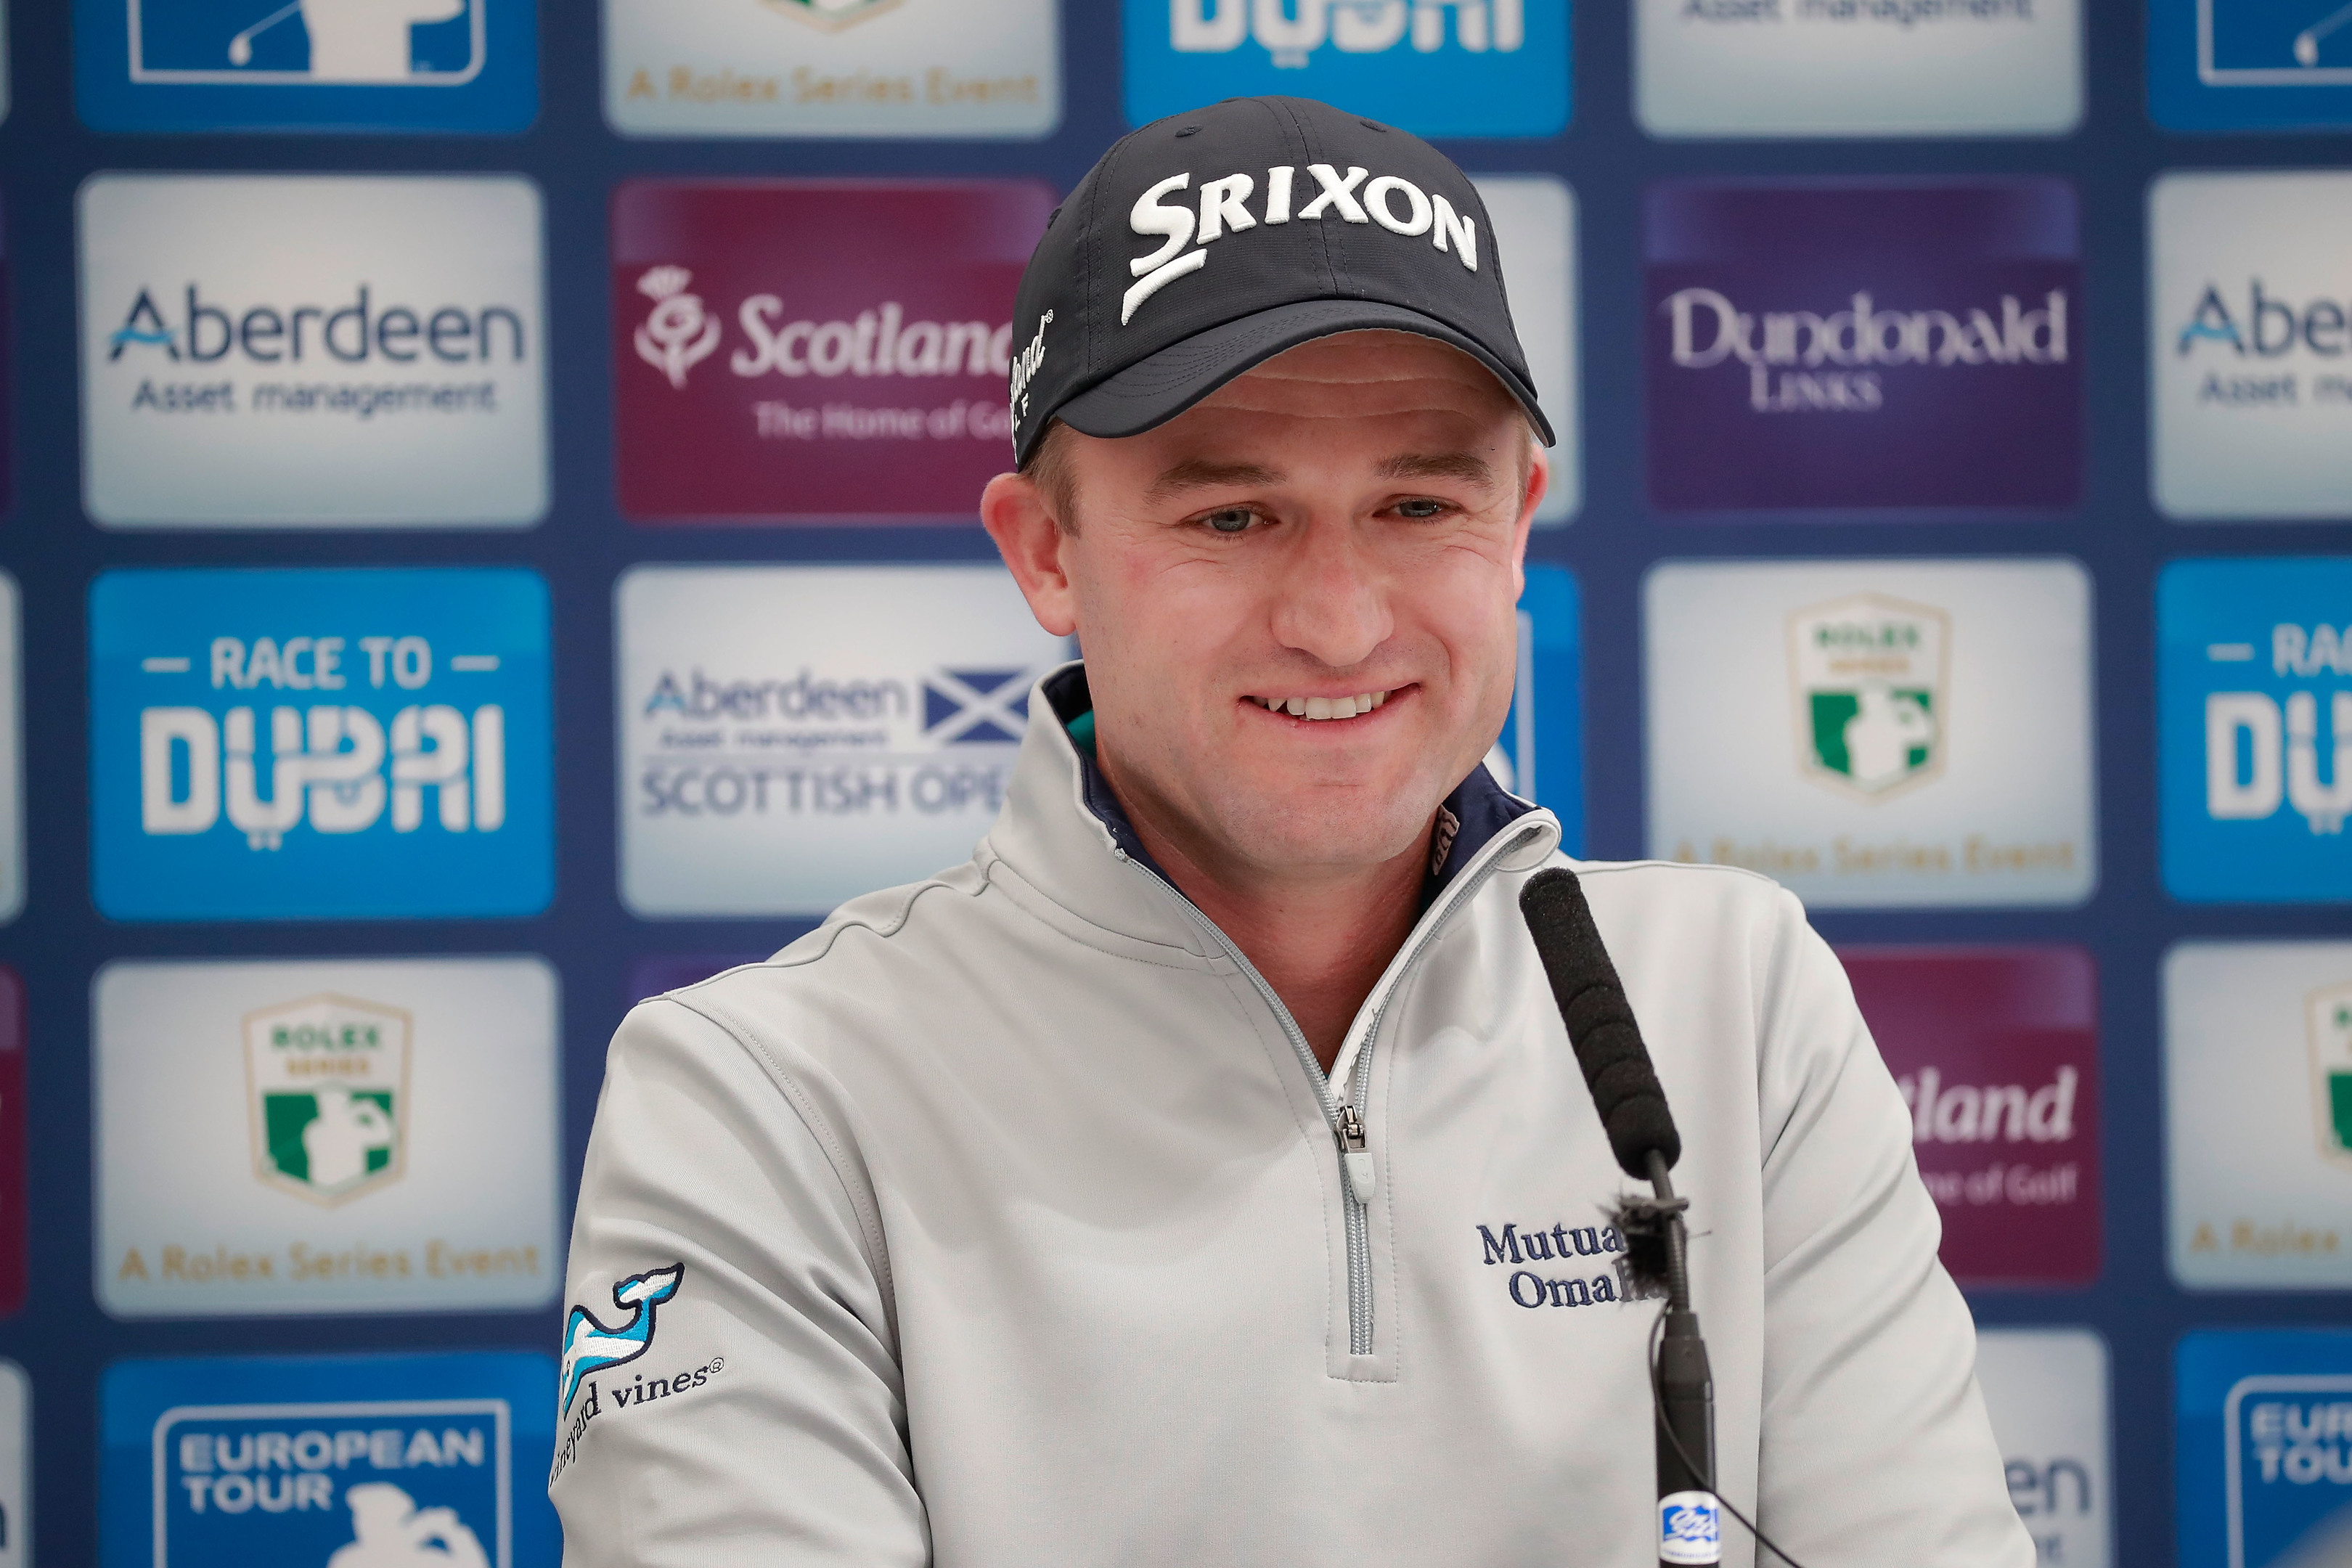 Russell Knox of Scotland talks at a press conference prior to the AAM Scottish Open at Dundonald Links.